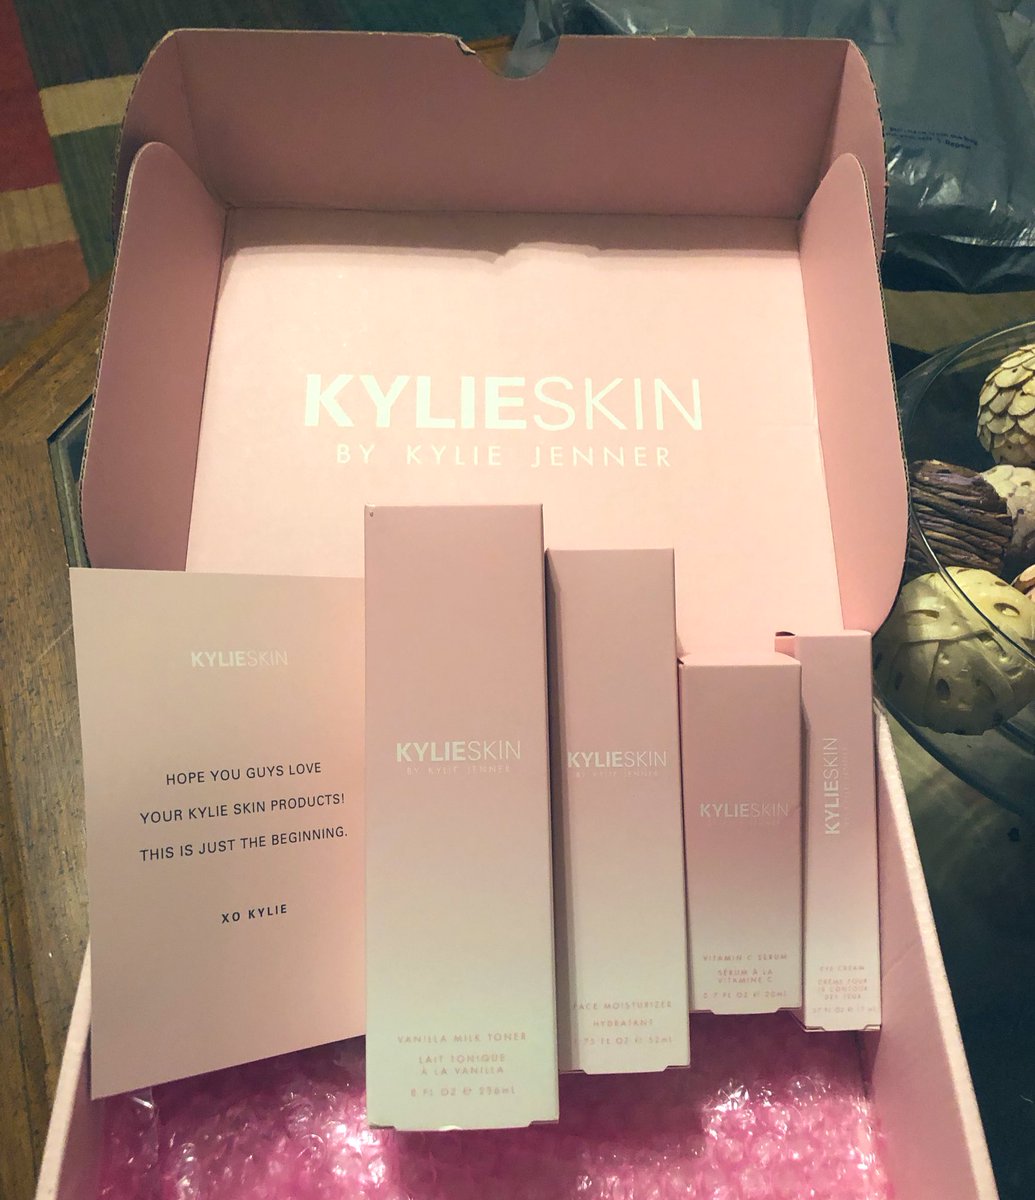 RT @its_me_danielle: Pretty stoked to try this stuff out @KylieJenner #KylieSkin https://t.co/uQkkRVTntI